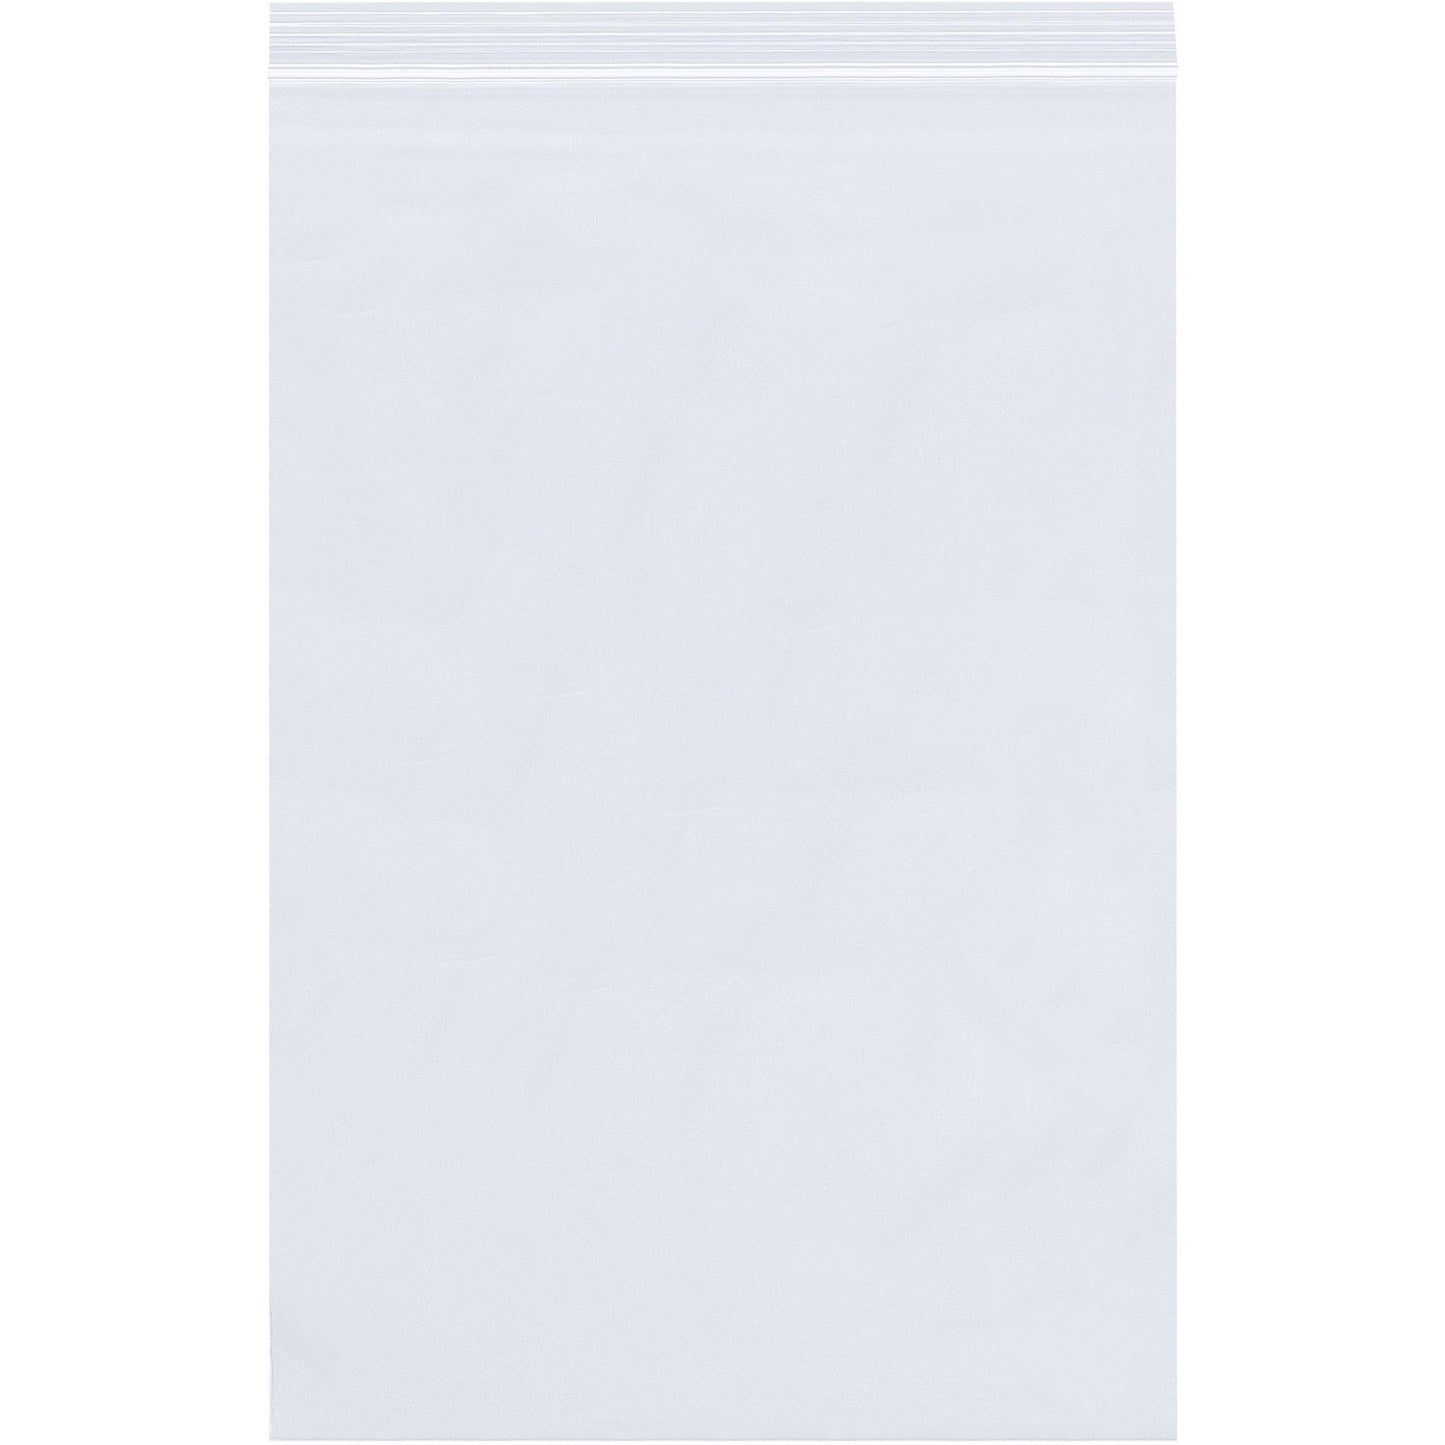 10 x 30" - 4 Mil Reclosable Poly Bags - PB4181